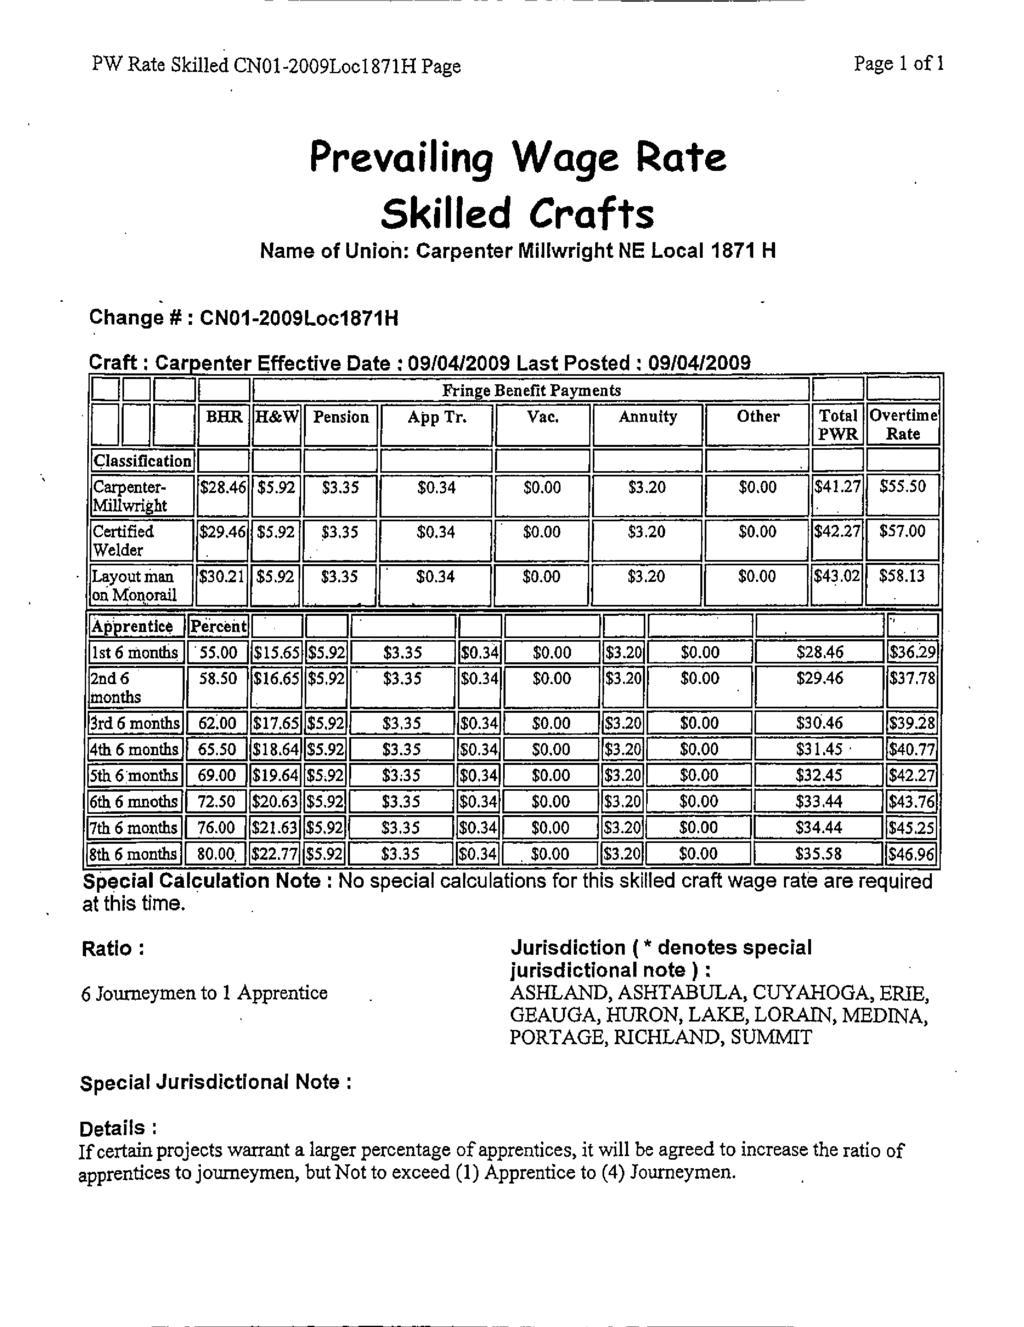 PW Rate Skilled CNO1-2009Loc1871H Page Page 1 of 1 Change #: CNO1-2009Loc1871H Prevailing Wage Rate Skilled Crafts Name of Union: Carpenter Millwright NE Local 1871 H Craft : Carpenter Effective Date